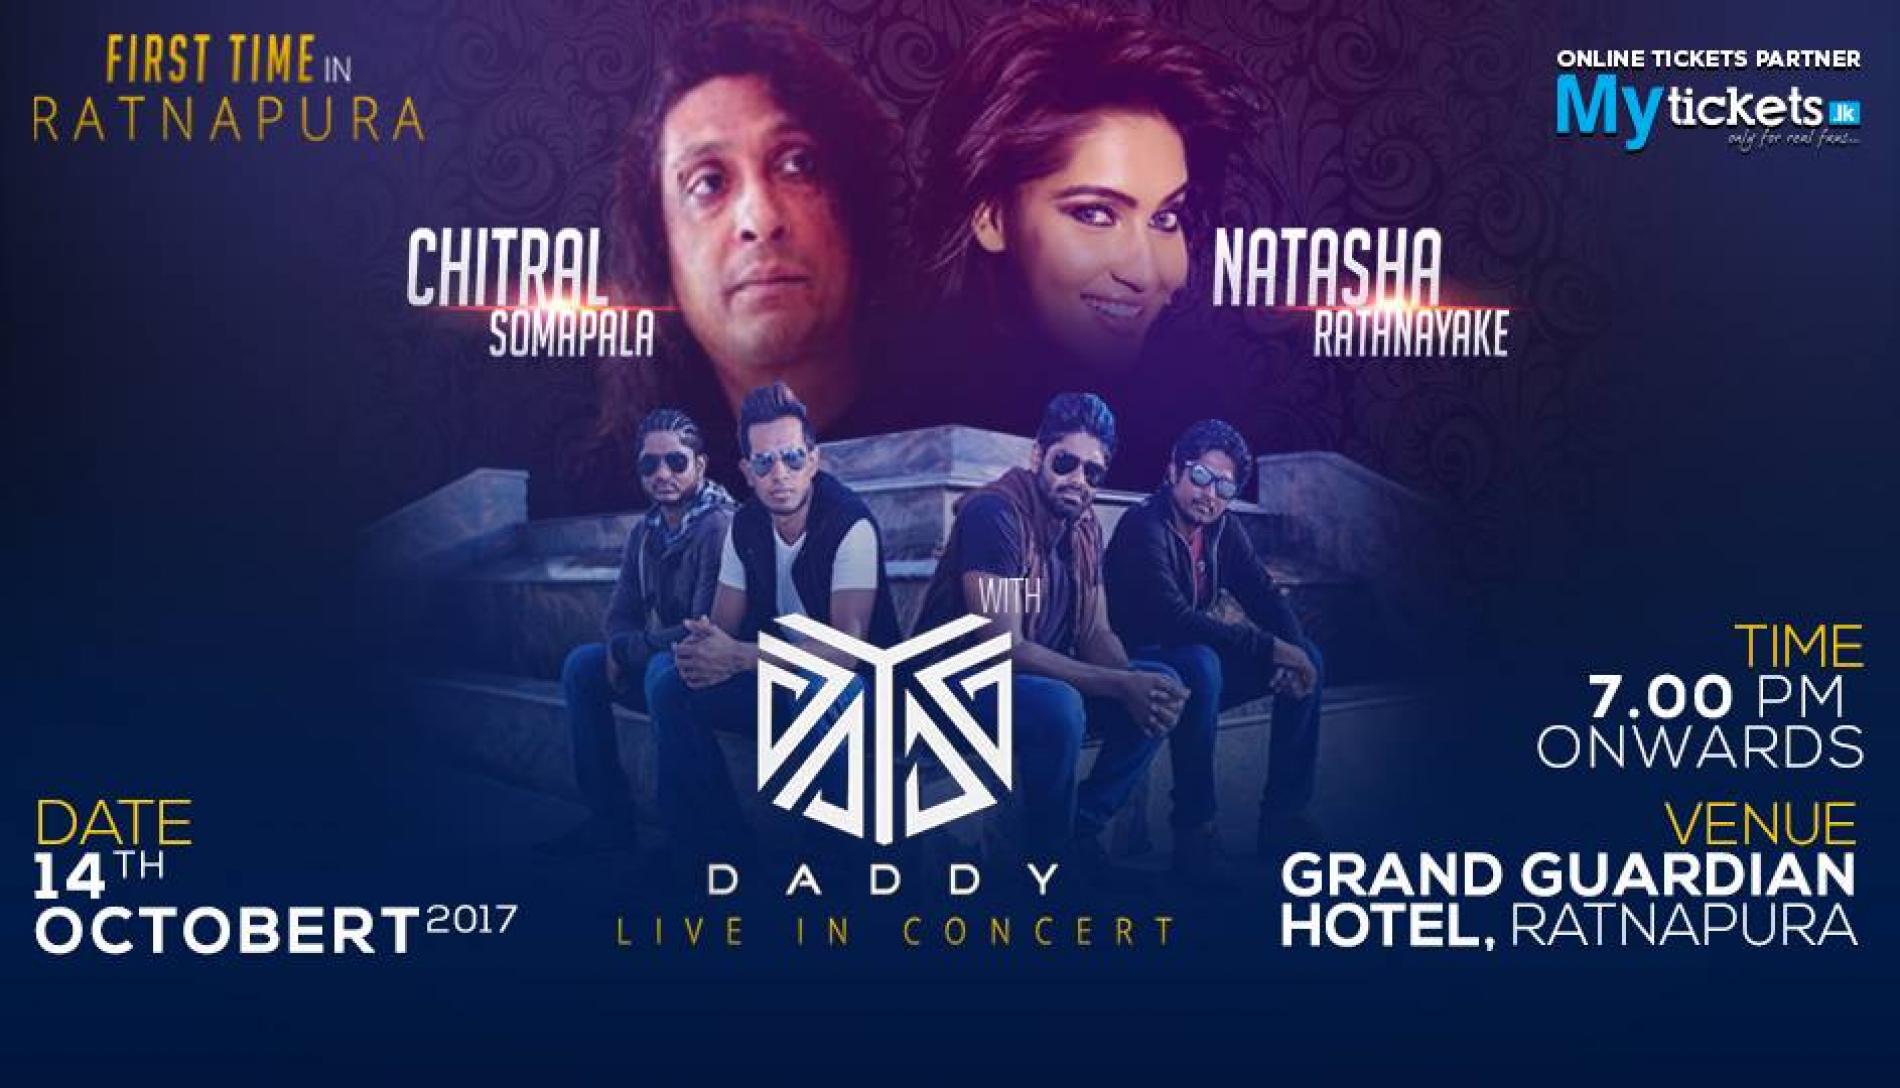 DADDY Live in Concert ft. Chitral & Natasha